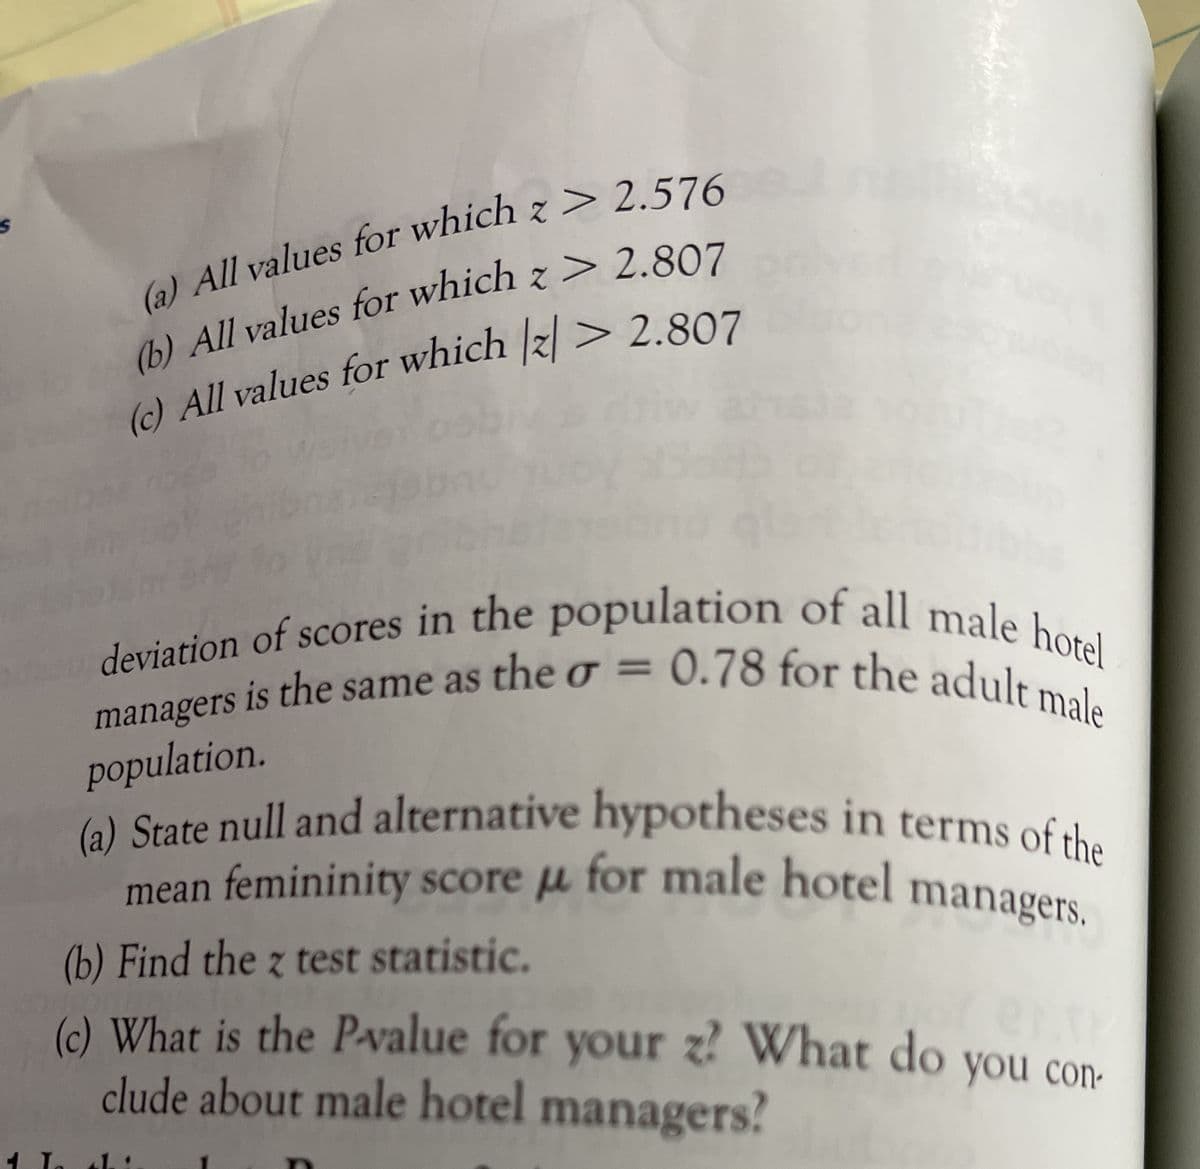 deviation of scores in the population of all male hotel
(a) State null and alternative hypotheses in terms of the
managers is the same as the o = 0.78 for the adult male
(6) All values for which z > 2.576
(6) All values for which z > 2.807
() All values for which |z| > 2.807
deviation of scores in the population of all mala i
managers is the same as the g=
population.
) State null and alternative hypotheses in terms of the
mean femininity score u for male hotel managers
(b) Find the z test statistic.
(c) What is the P-value for
clude about male hotel managers?
your z? What do you con-
you con-
1.:
